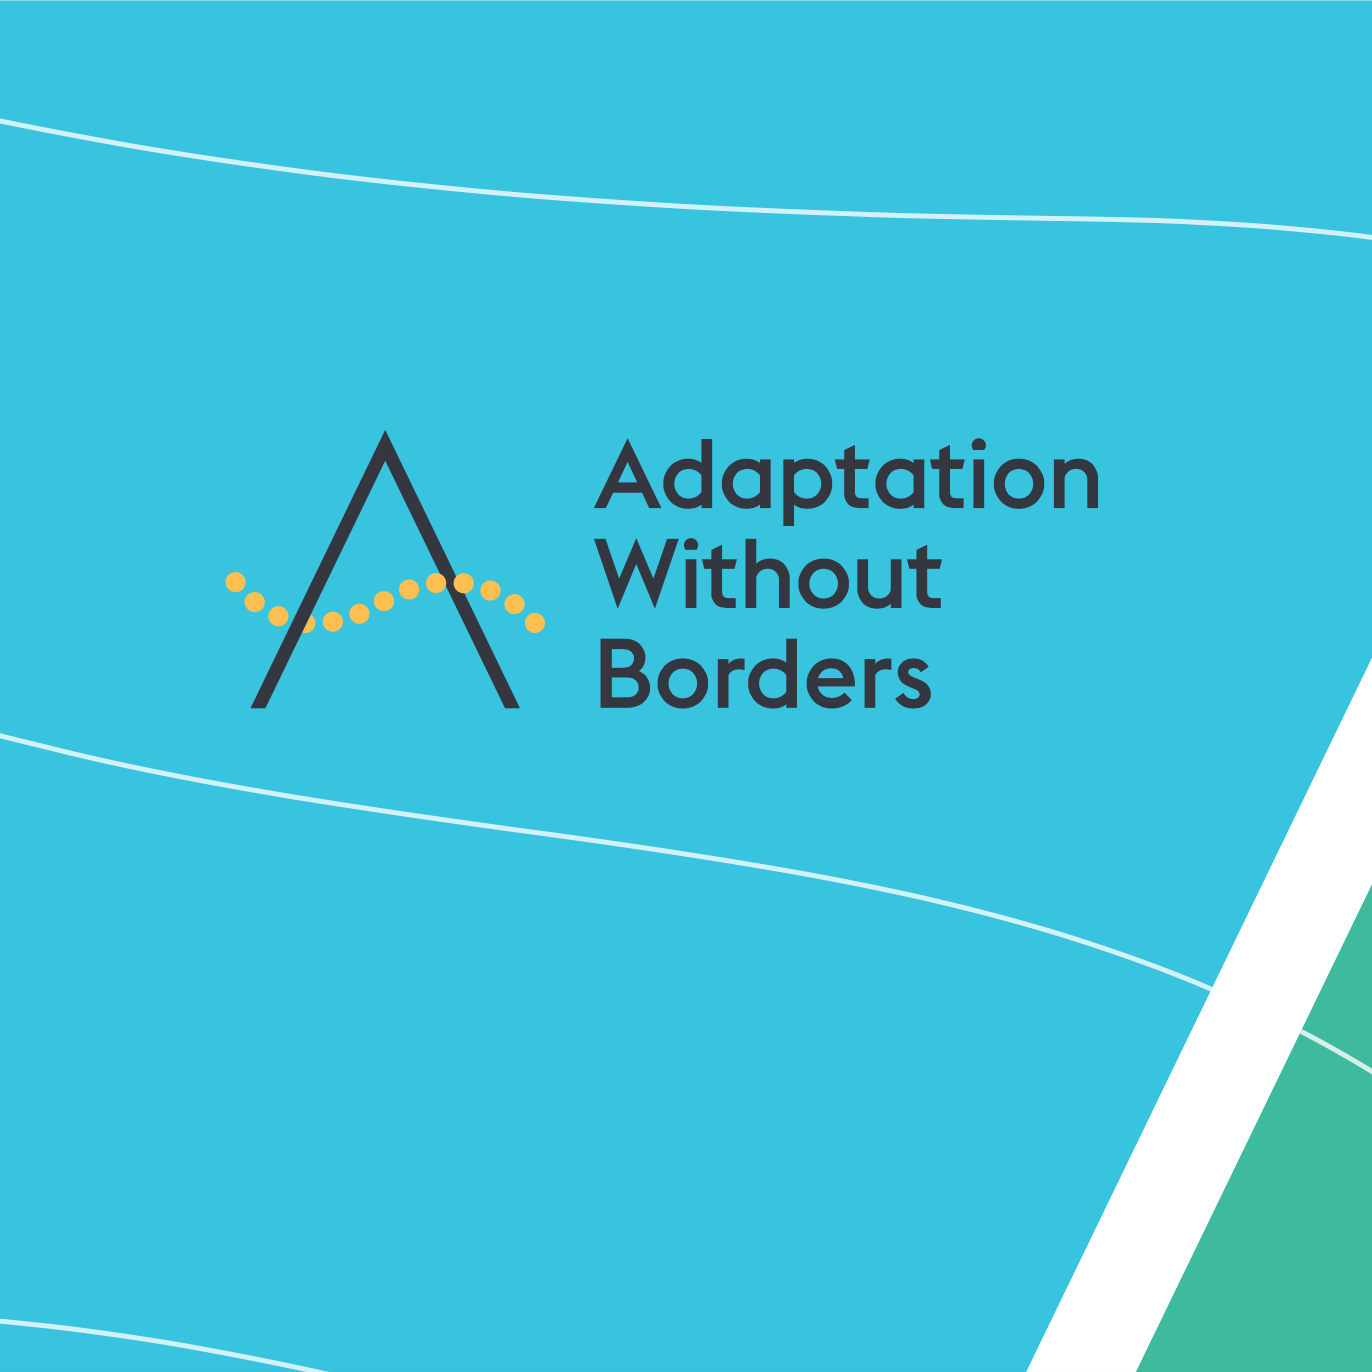 Adaptation Without Borders policy brief